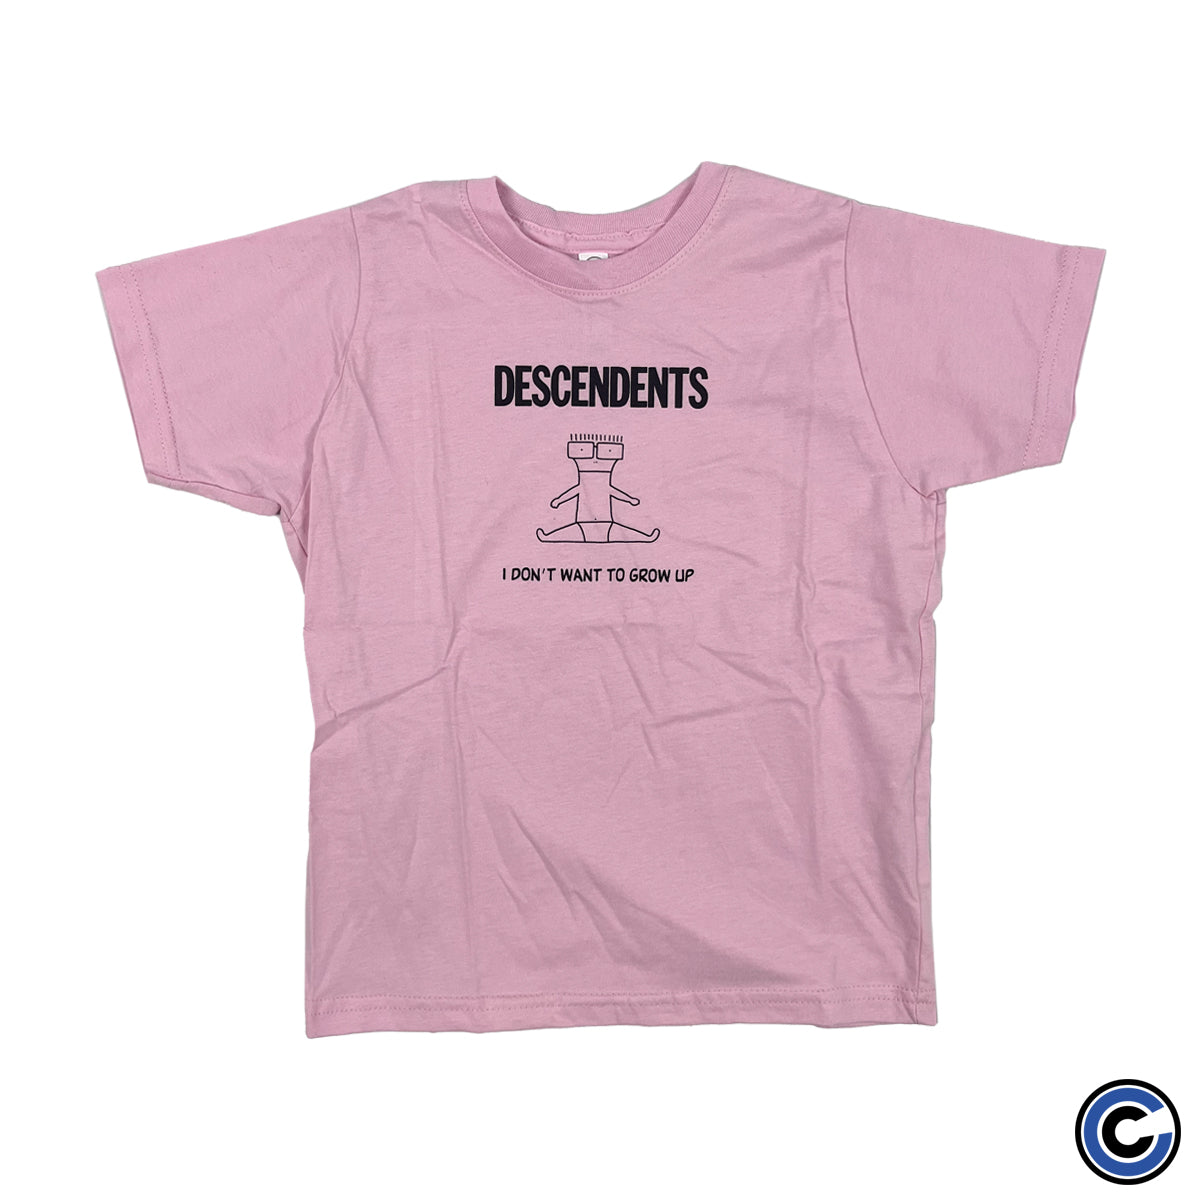 Descendents "I Don't Want To Grow Up" Toddler Tee